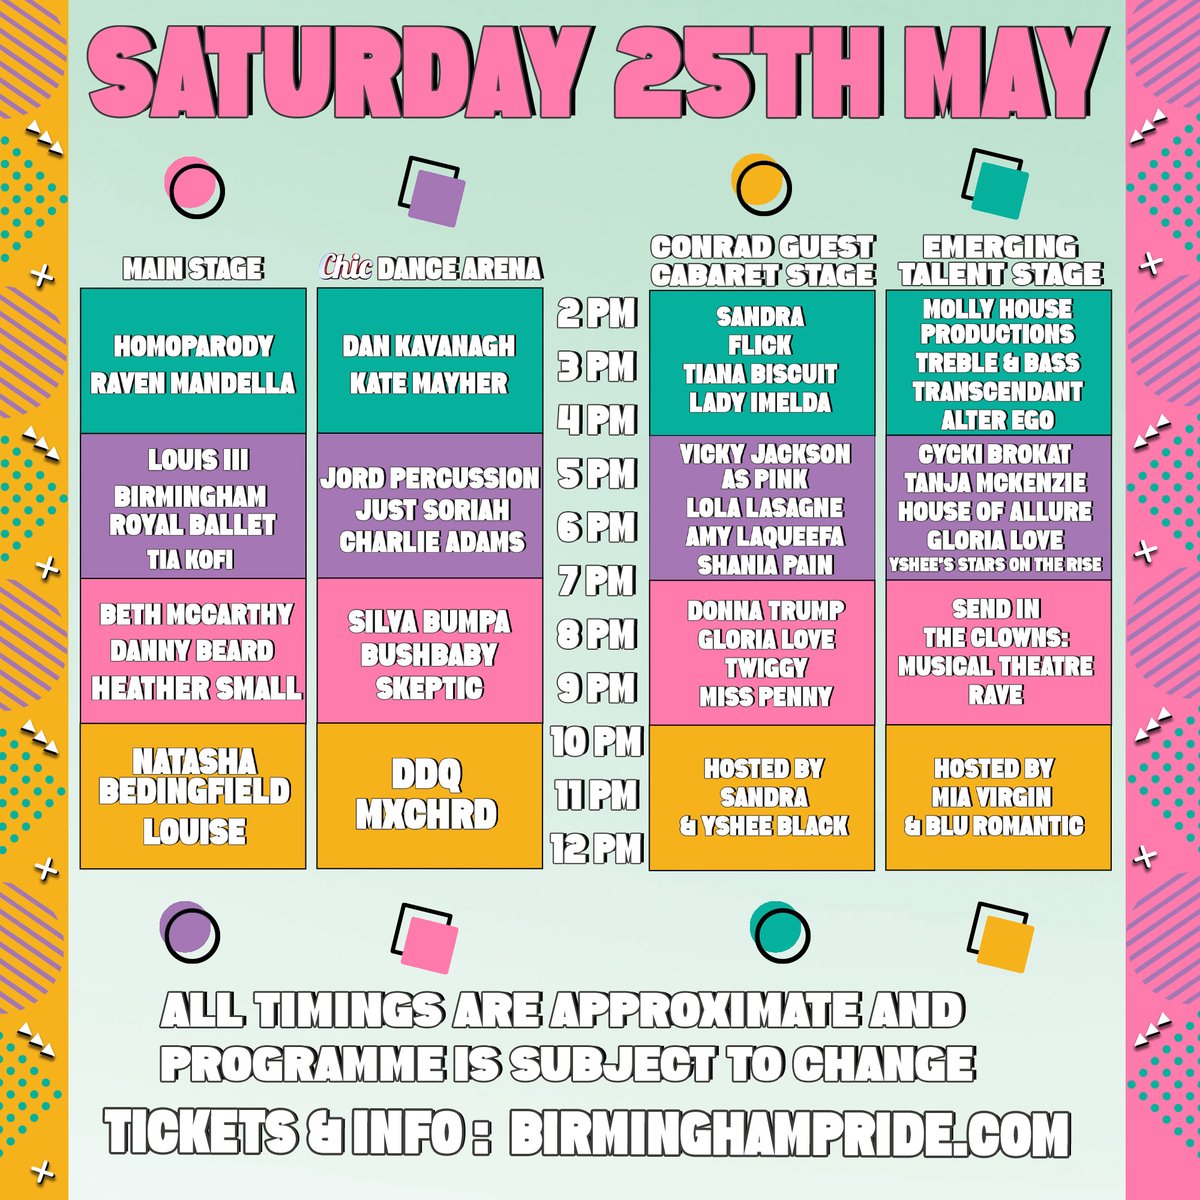 Off to @BirminghamPride today. Some great acts performing (we all know how much I love @LouiseRedknapp, right?) but of course I'm going to have to check out that Musical Theatre Rave too.